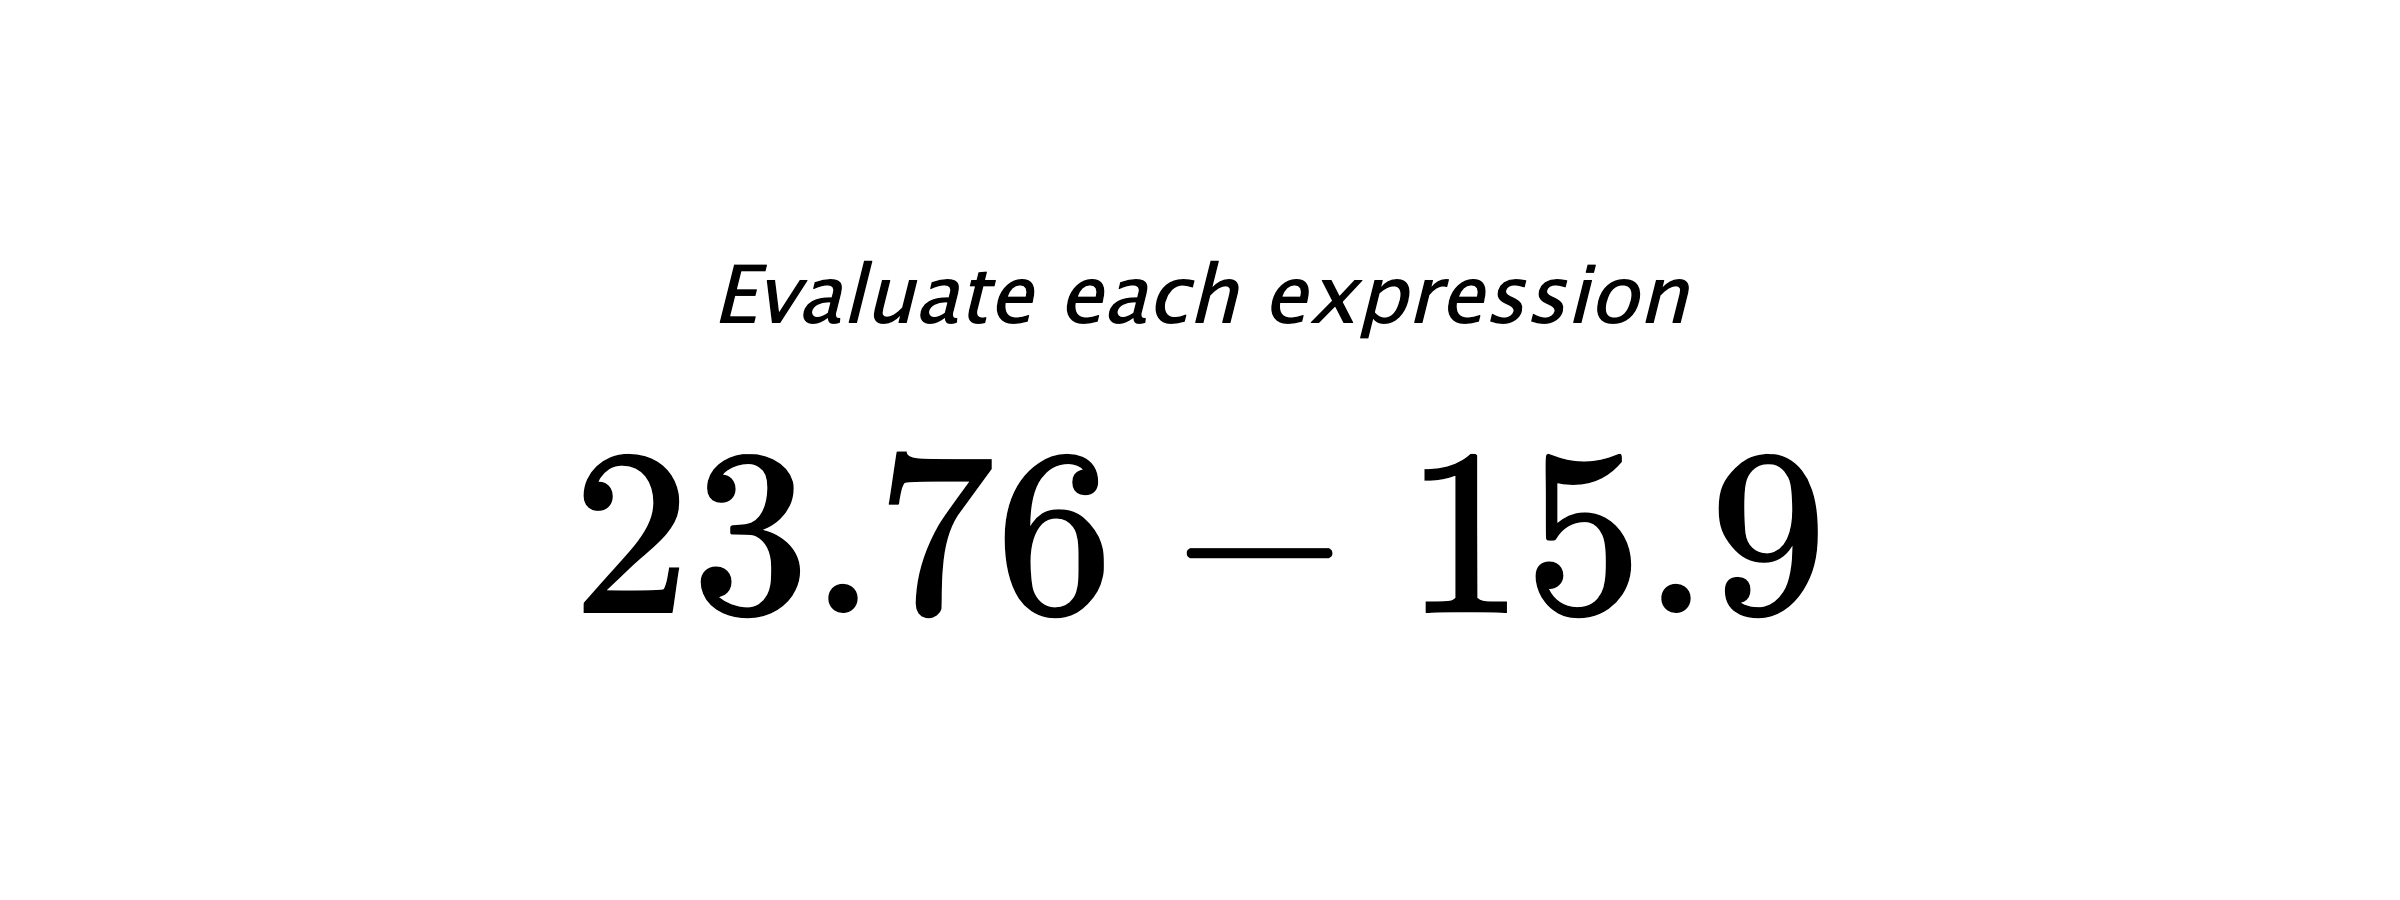 Evaluate each expression $ 23.76-15.9 $